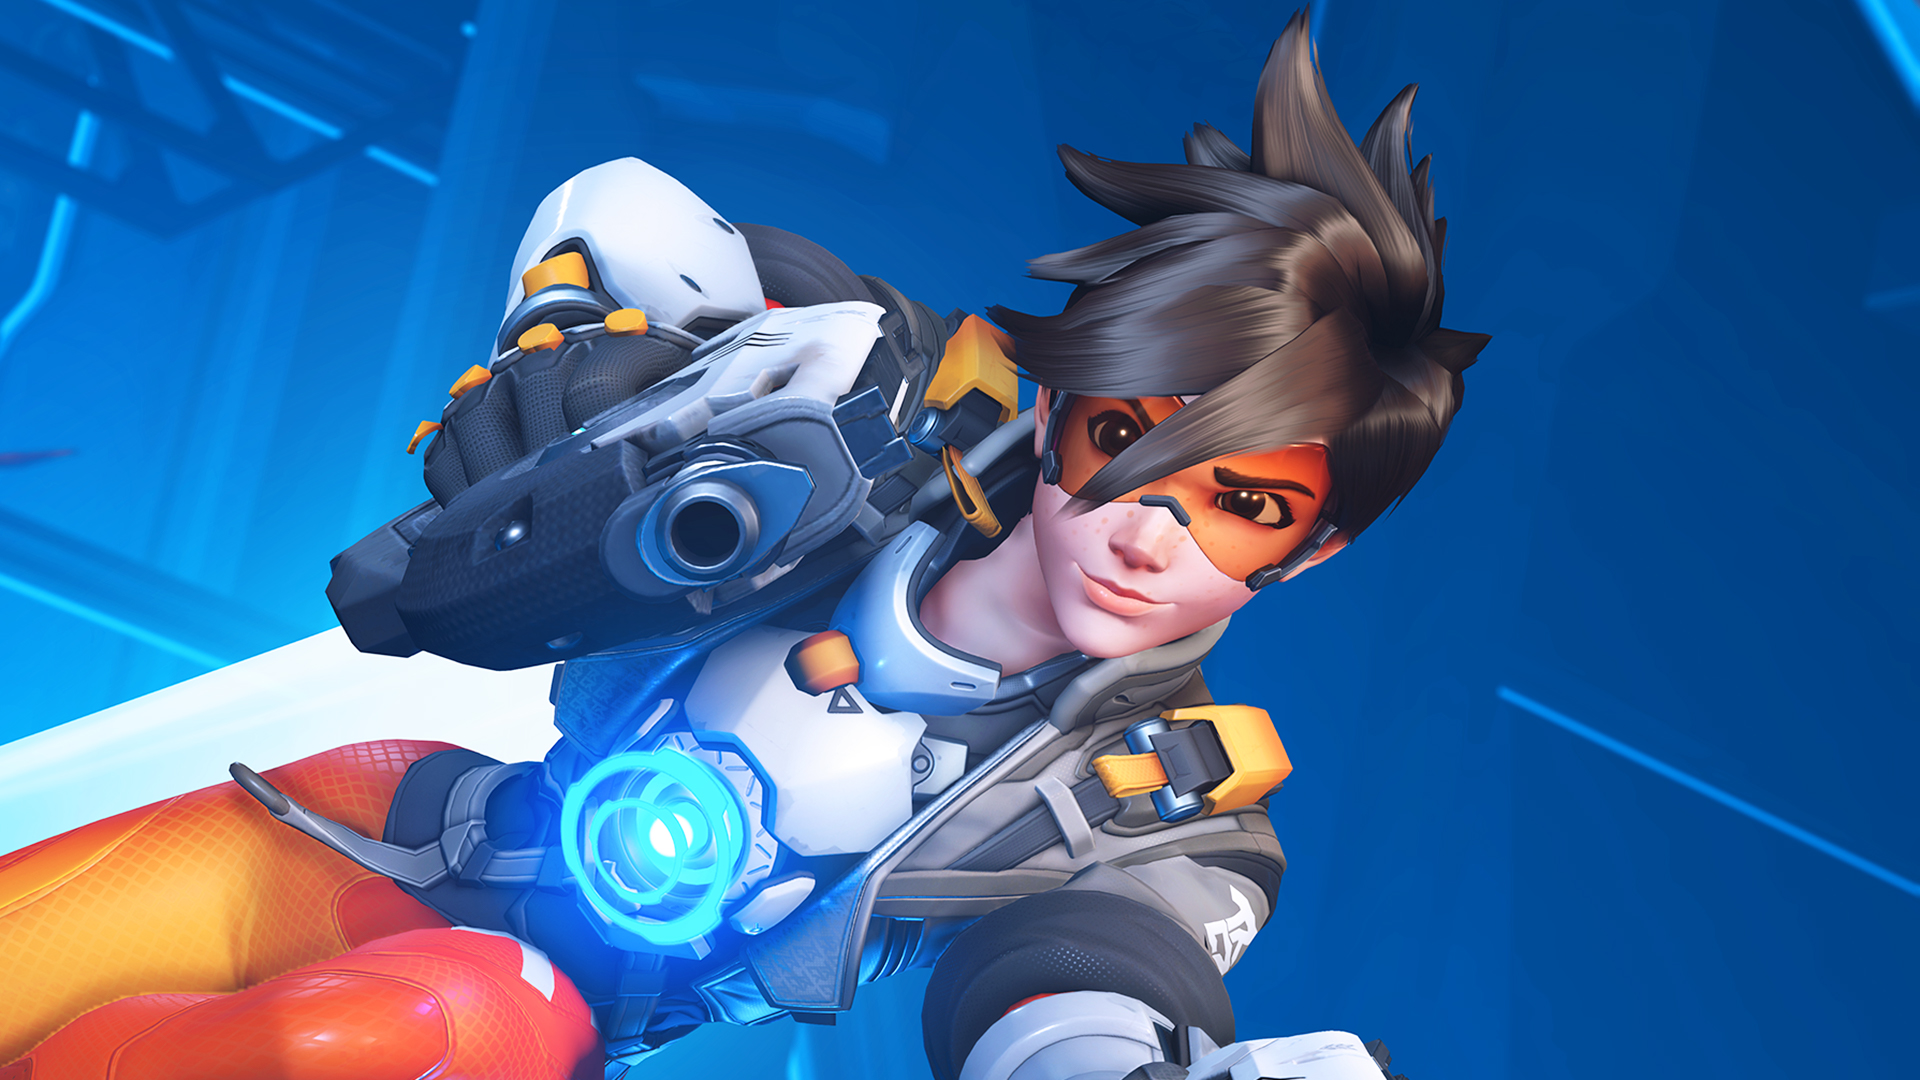 Overwatch Tracer - Tips To Master The British Girl Today